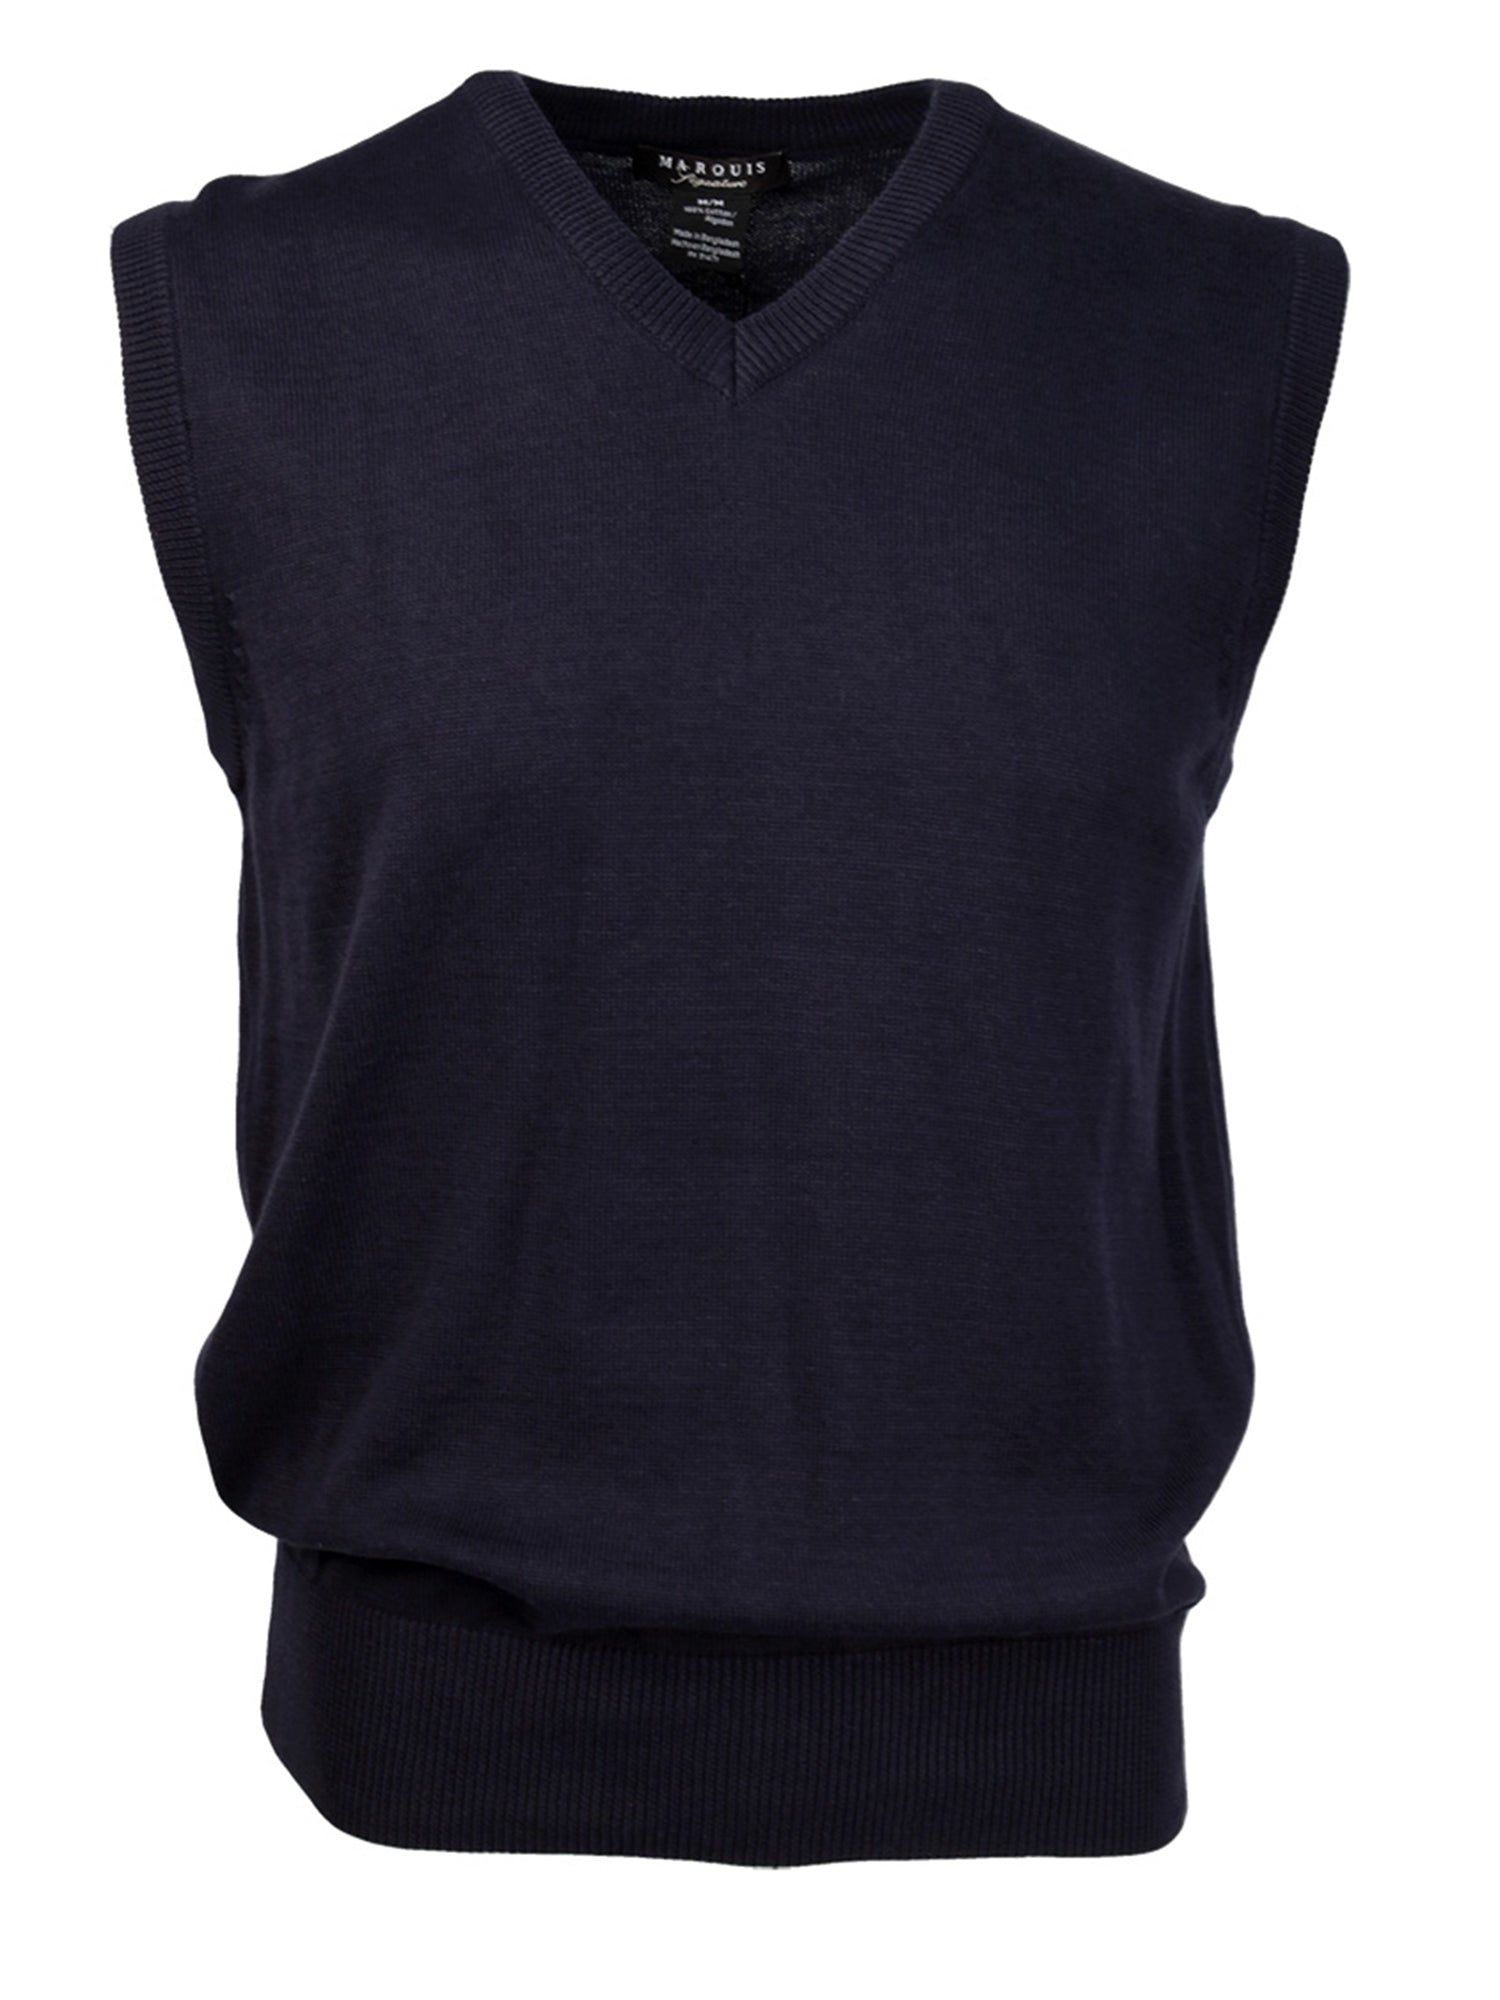 Marquis Solid Cotton V-Neck, Sleeve Less Vest Sweater Sweater Marquis Navy Medium 